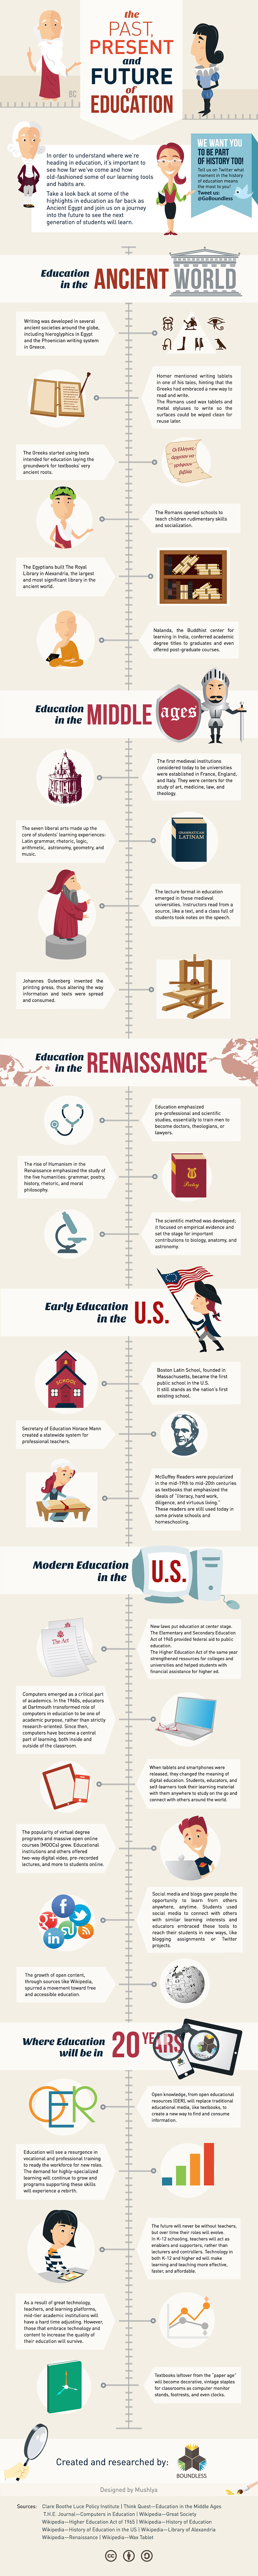 history_of_education_infographic